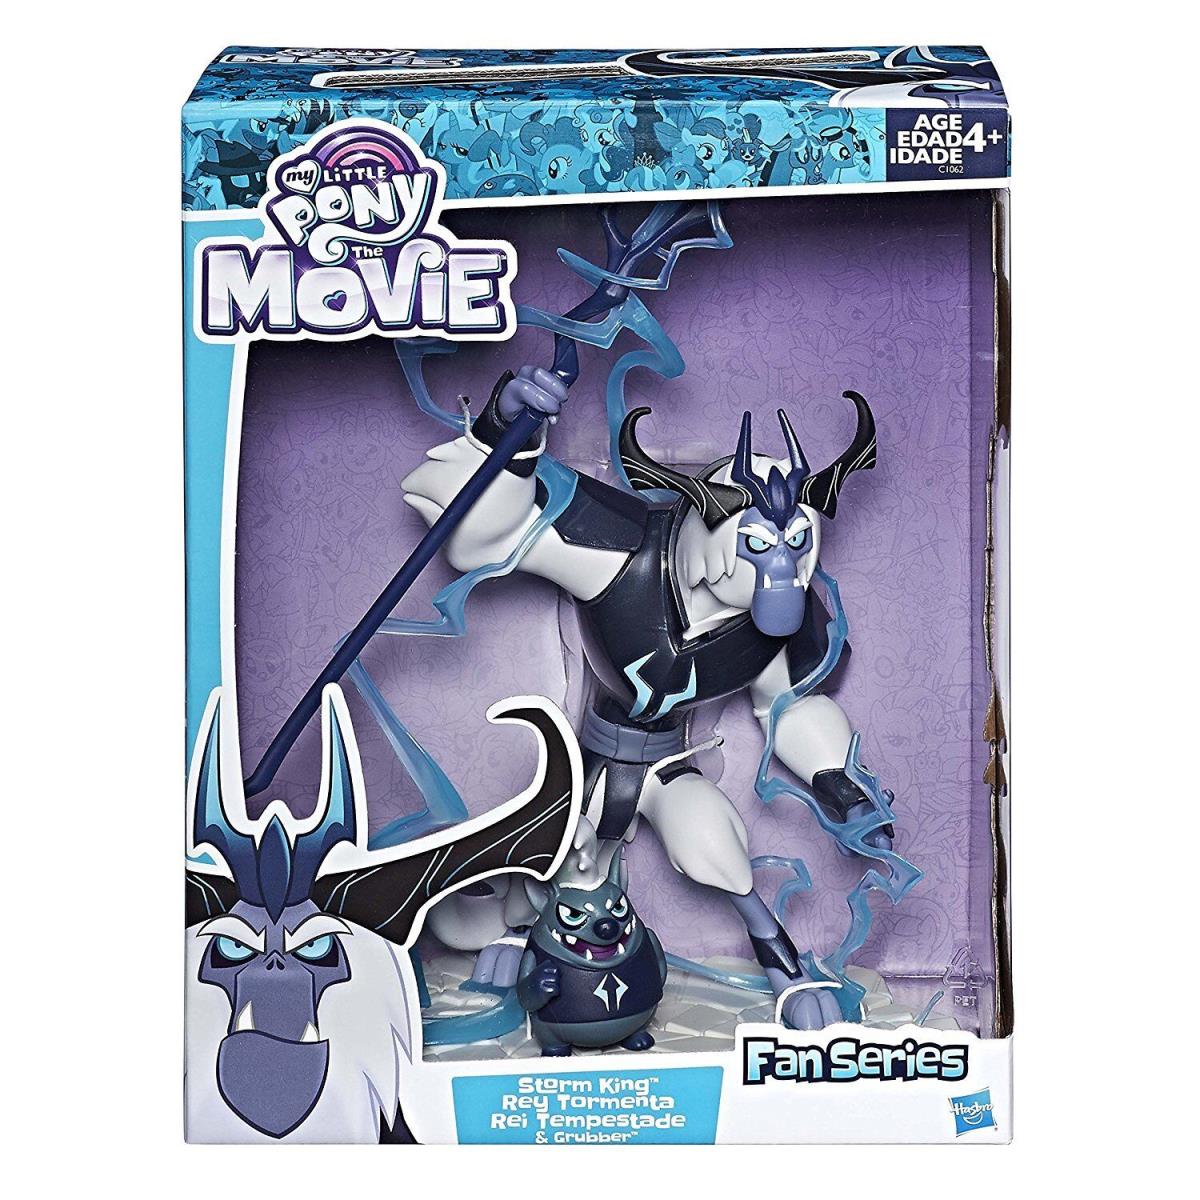 My Little Pony: The Movie Storm King Grubber Boxed Set Hasbro